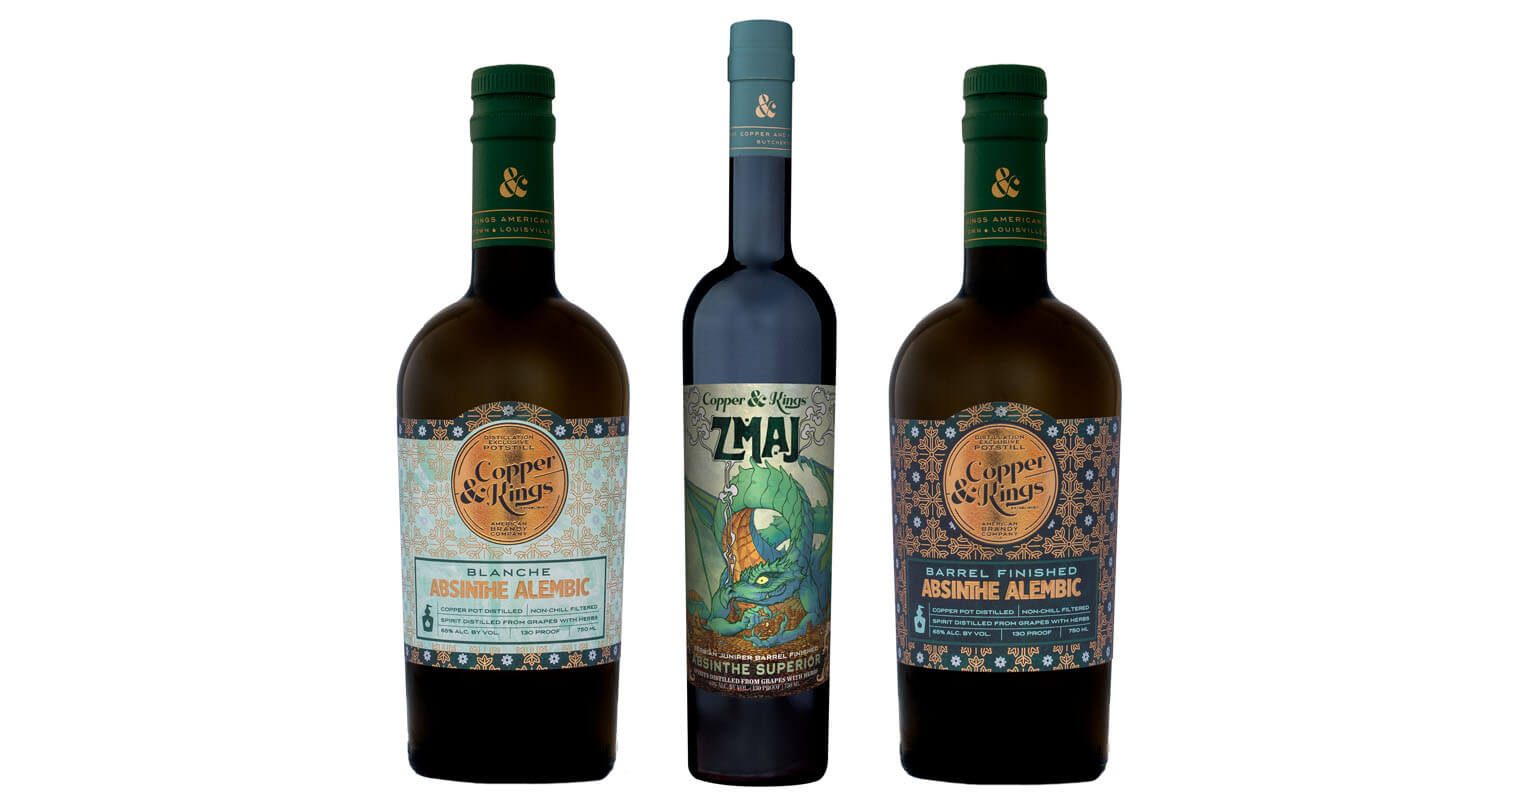 Absinthe Minded Copper & Kings, featured image, bottles on white